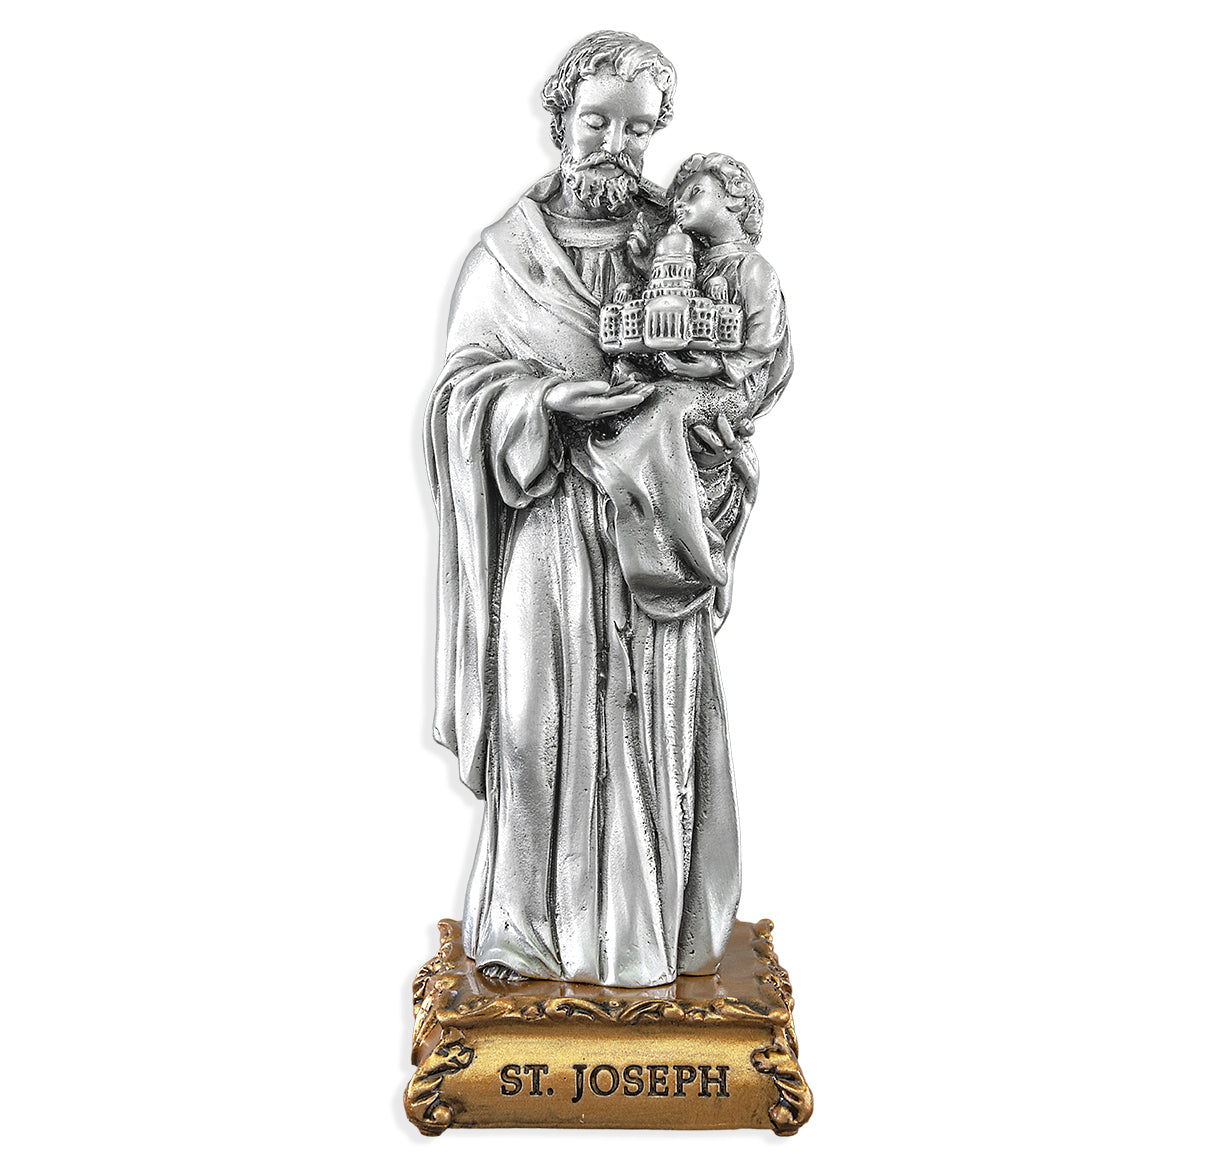 St. Joseph (Foster Father of Jesus) Pewter Statue